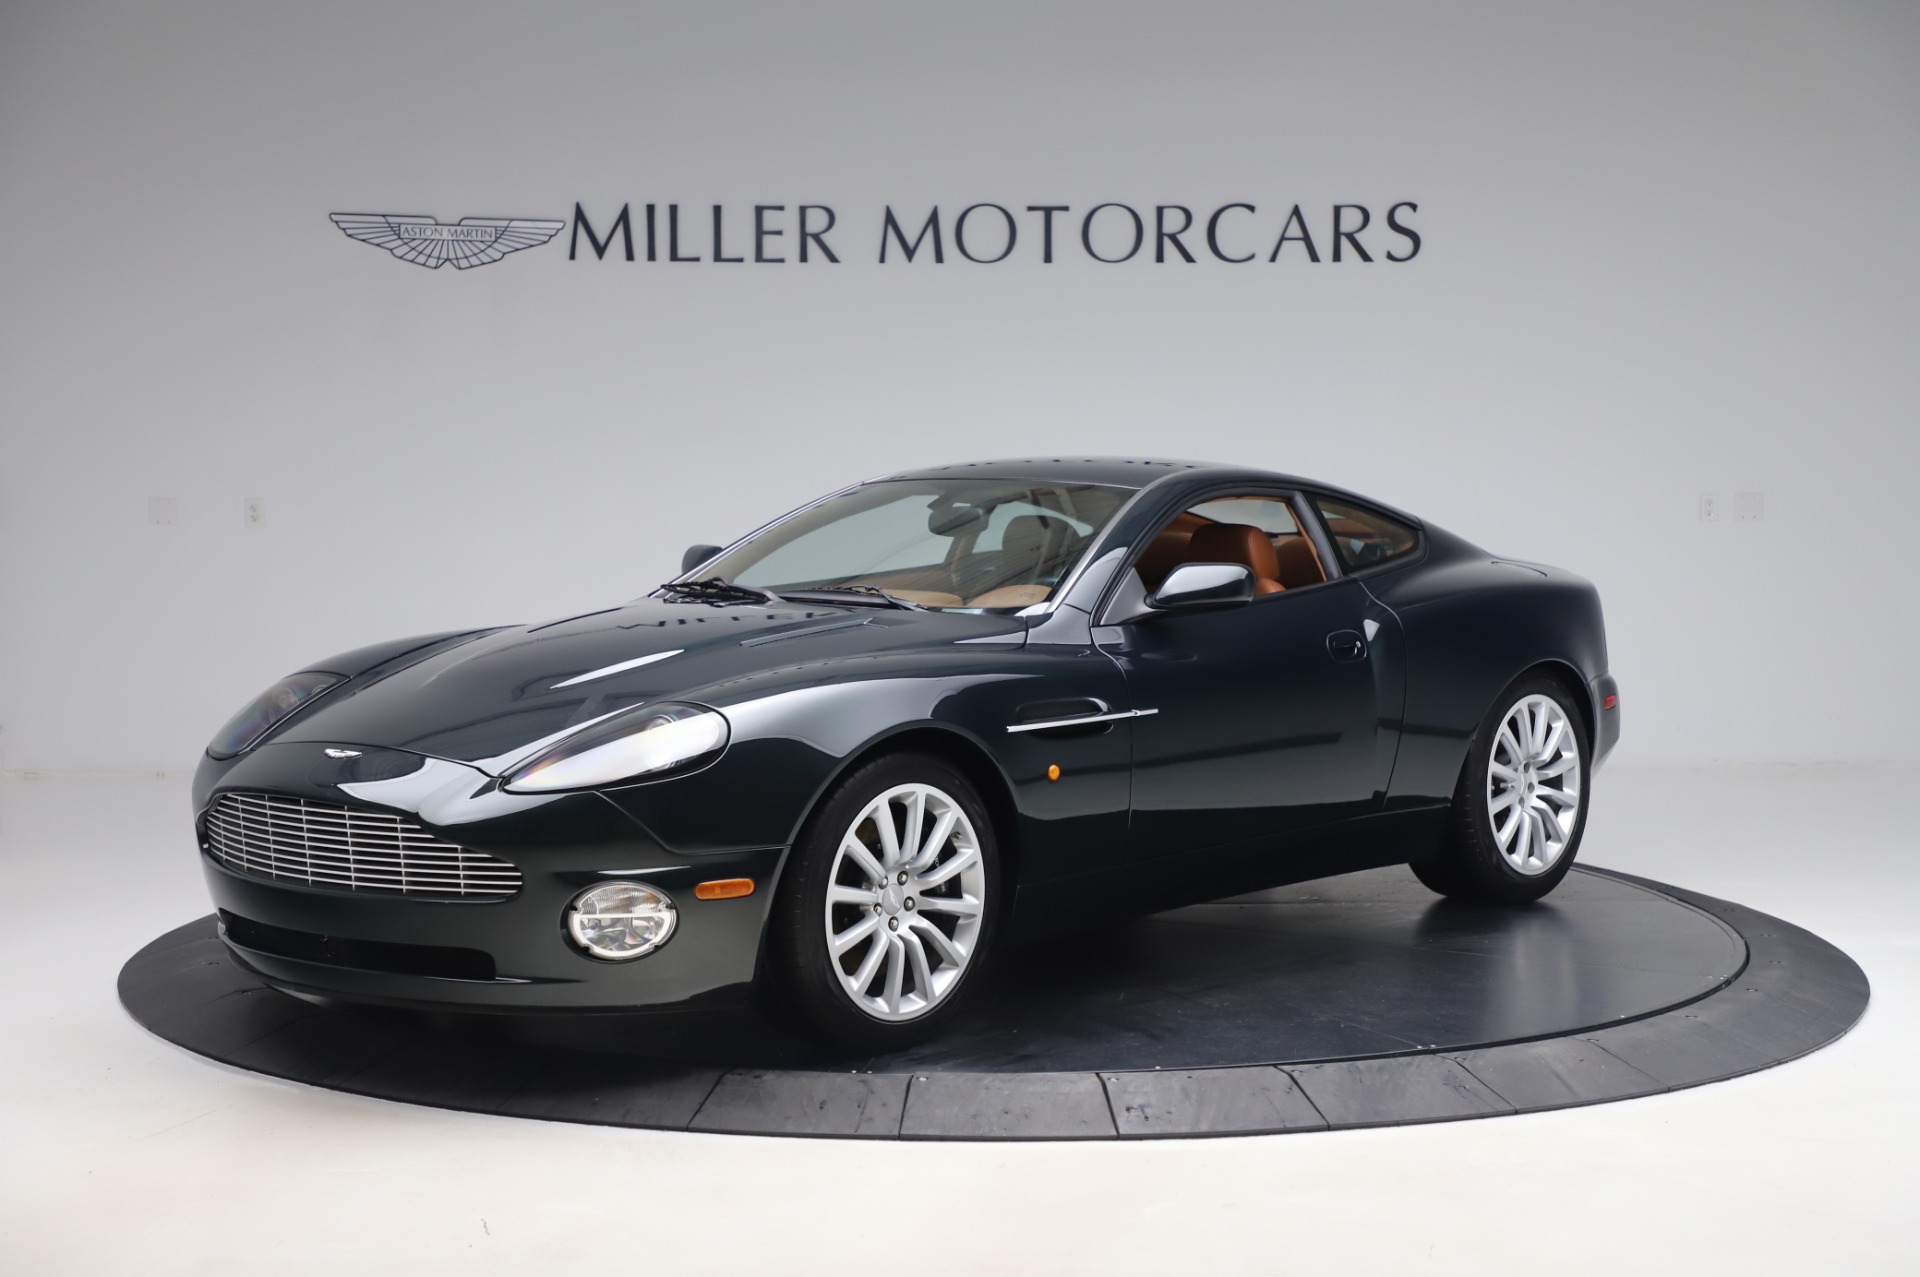 Used 2003 Aston Martin V12 Vanquish Coupe for sale $99,900 at Rolls-Royce Motor Cars Greenwich in Greenwich CT 06830 1